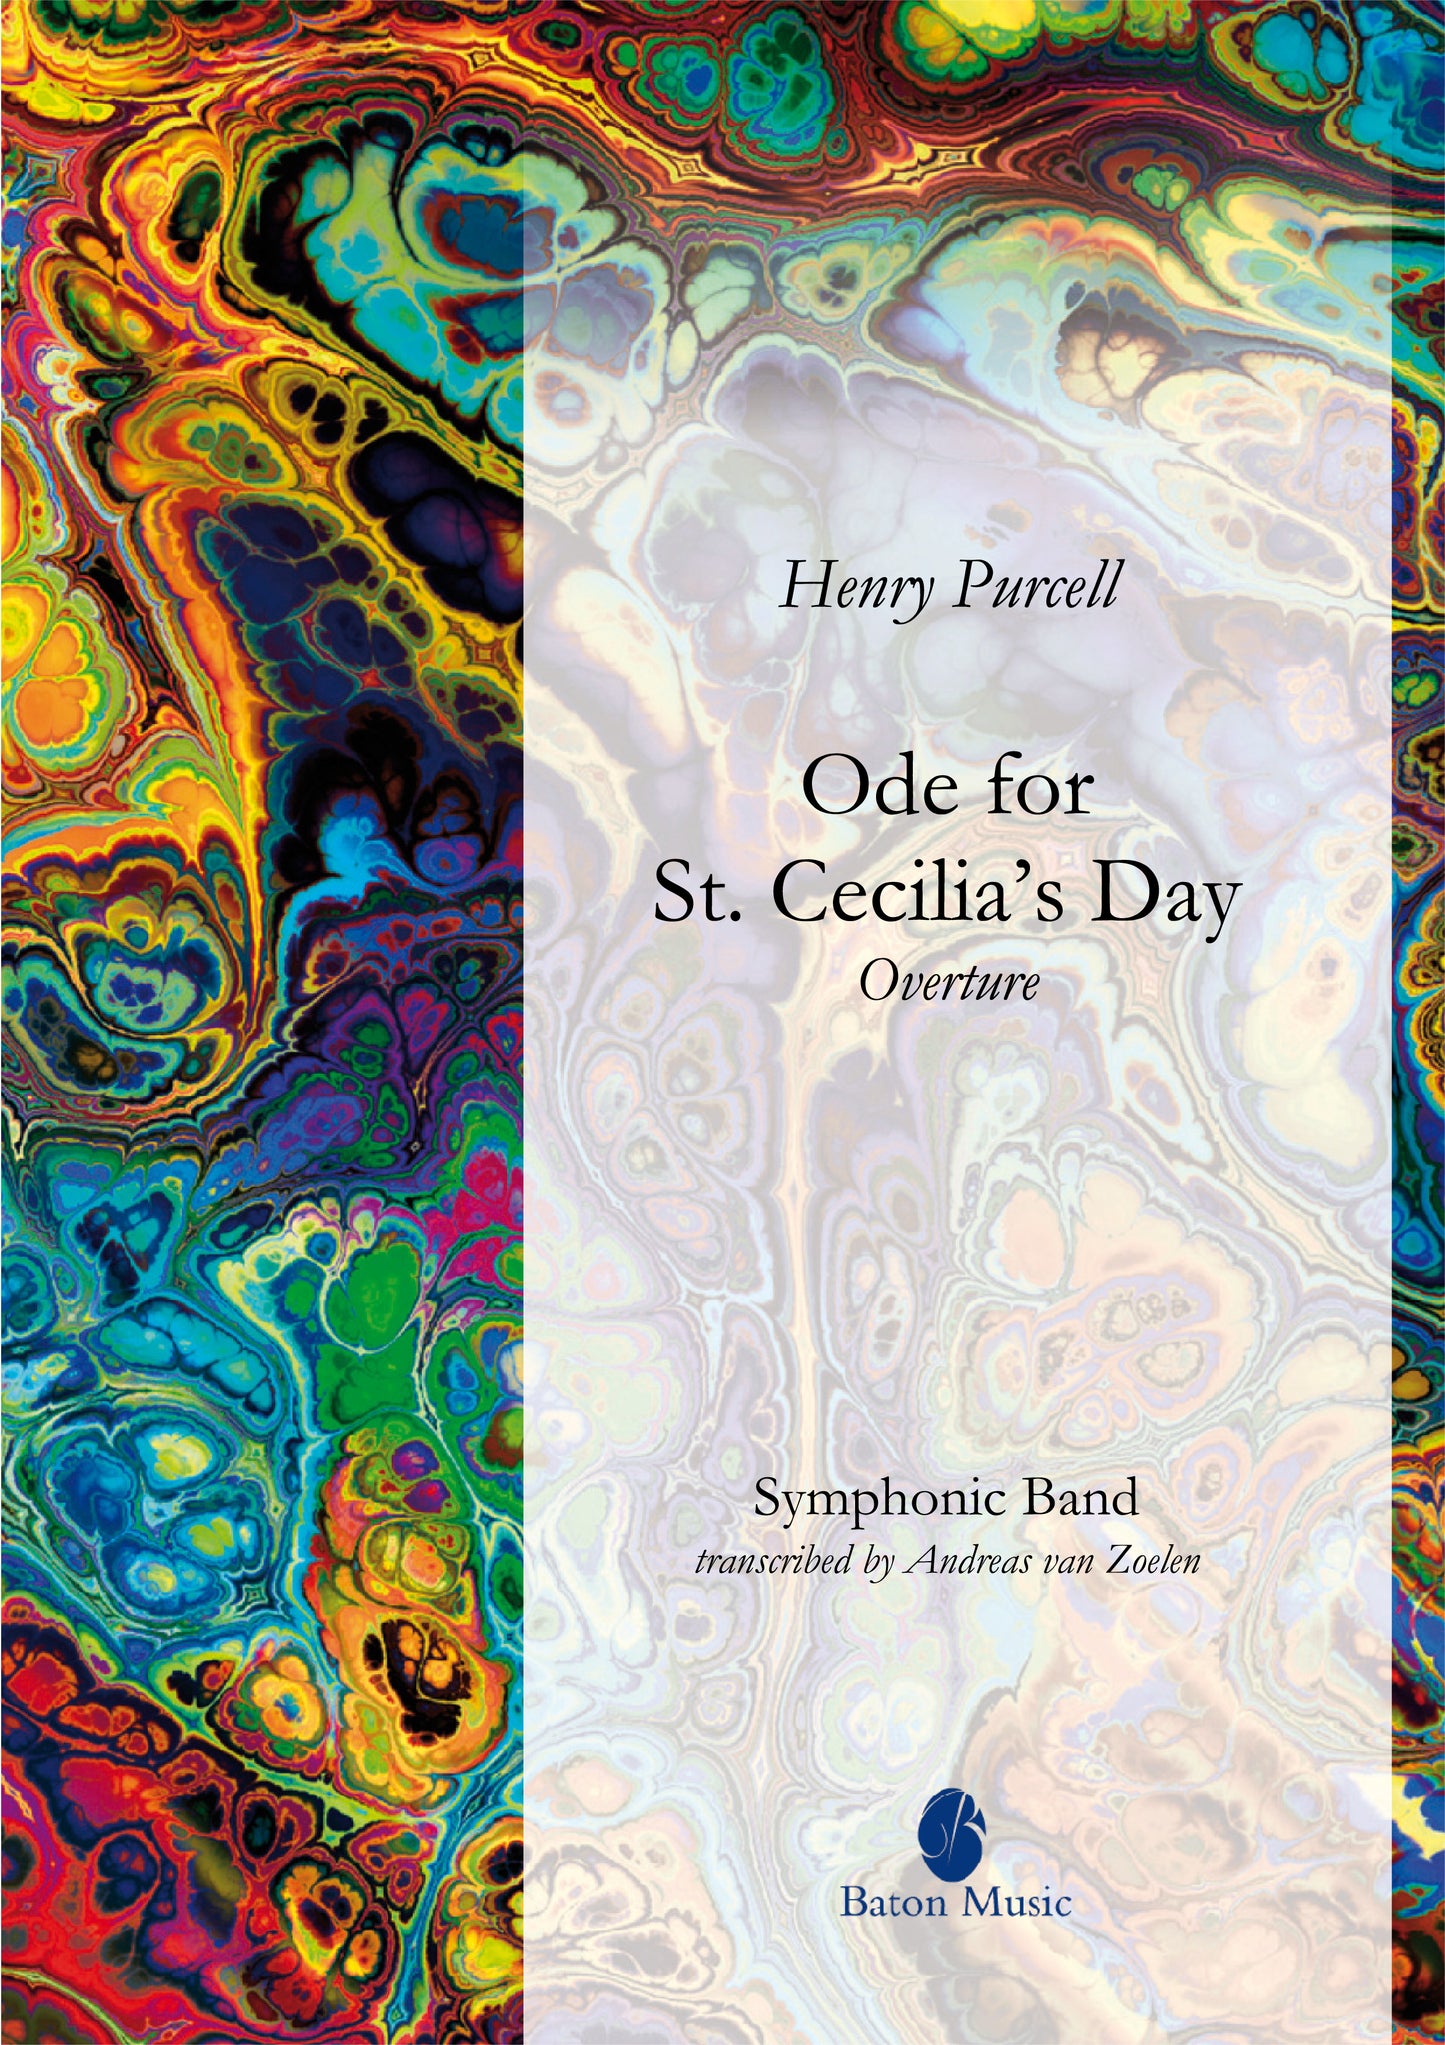 Ode for St. Cecilia's Day (Overture) - Purcell